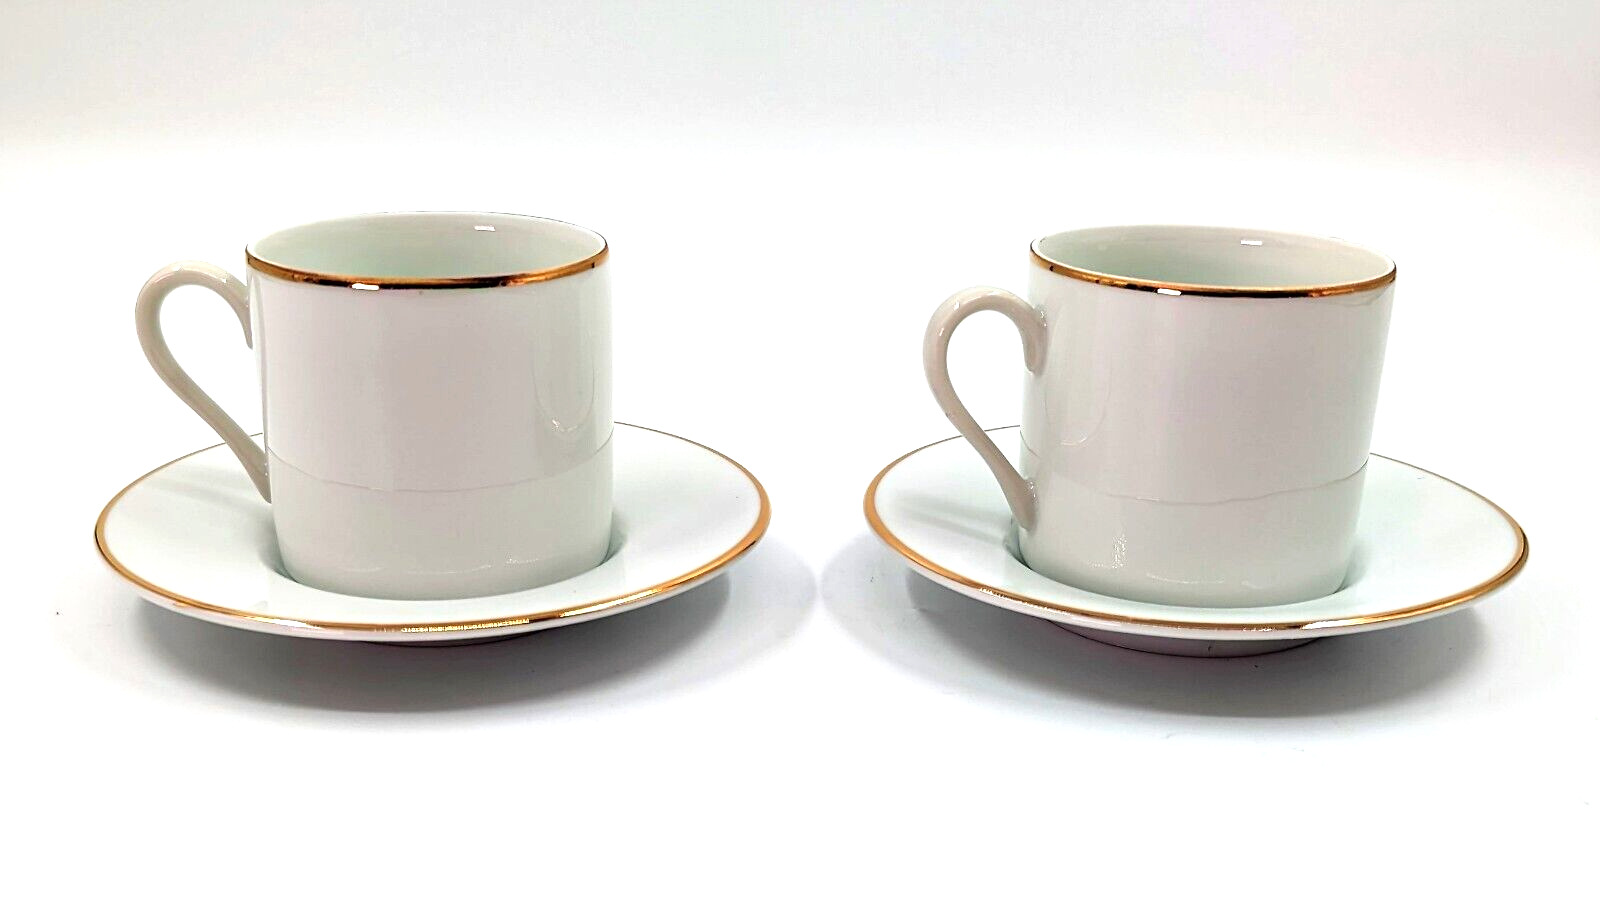 Set of 2 Tiffany & Co. Demitasse Espresso Cups & Saucers, TIC10, VG Cond.